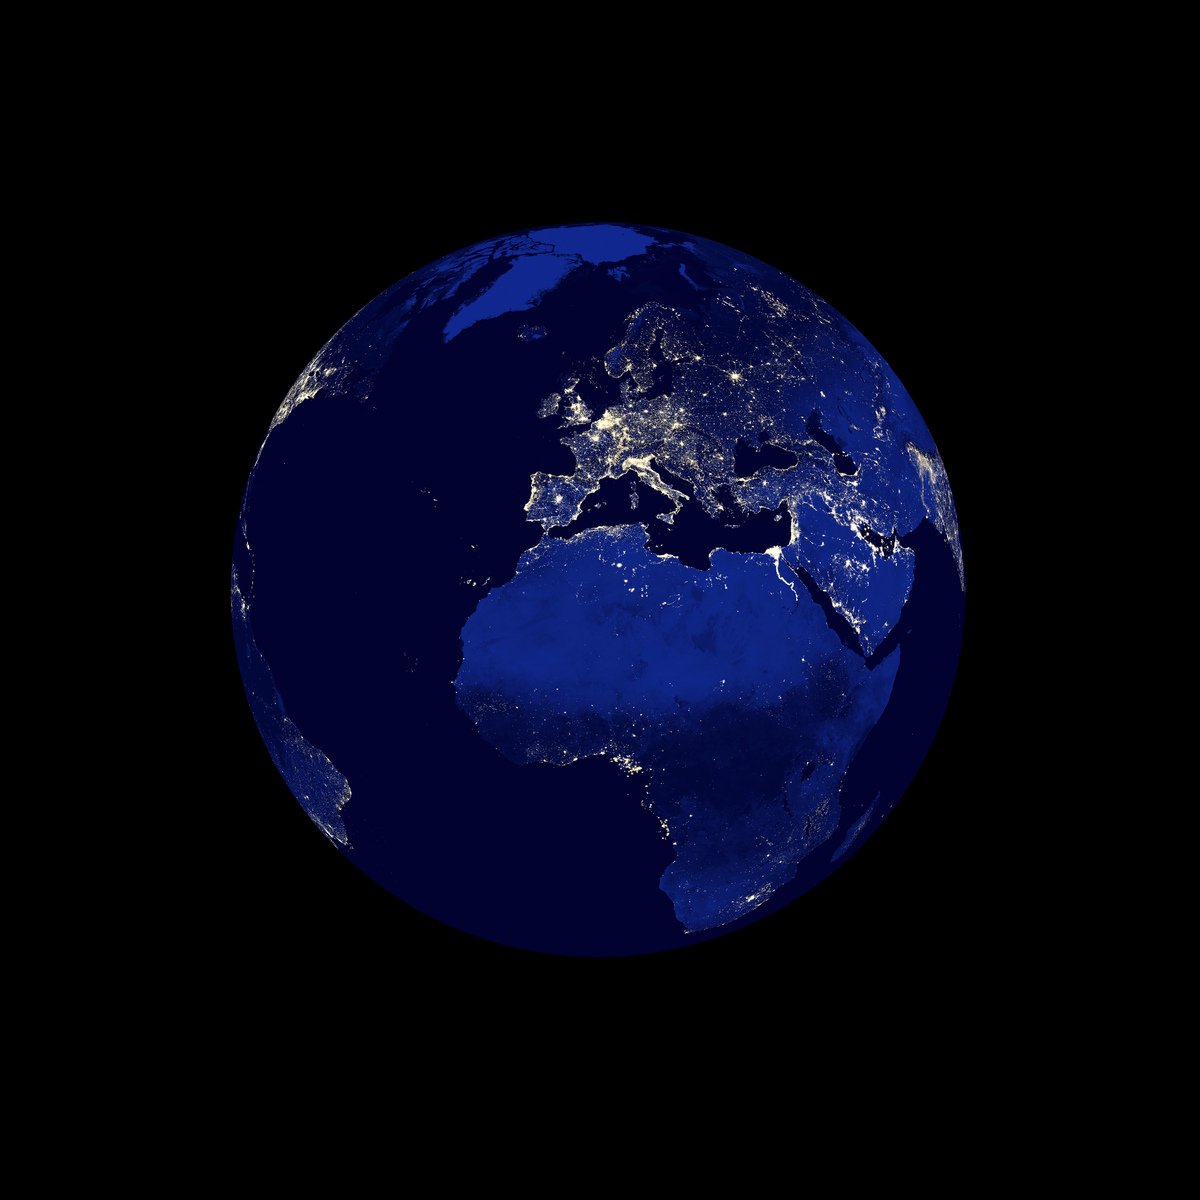 this is an image of the earth with bright lights